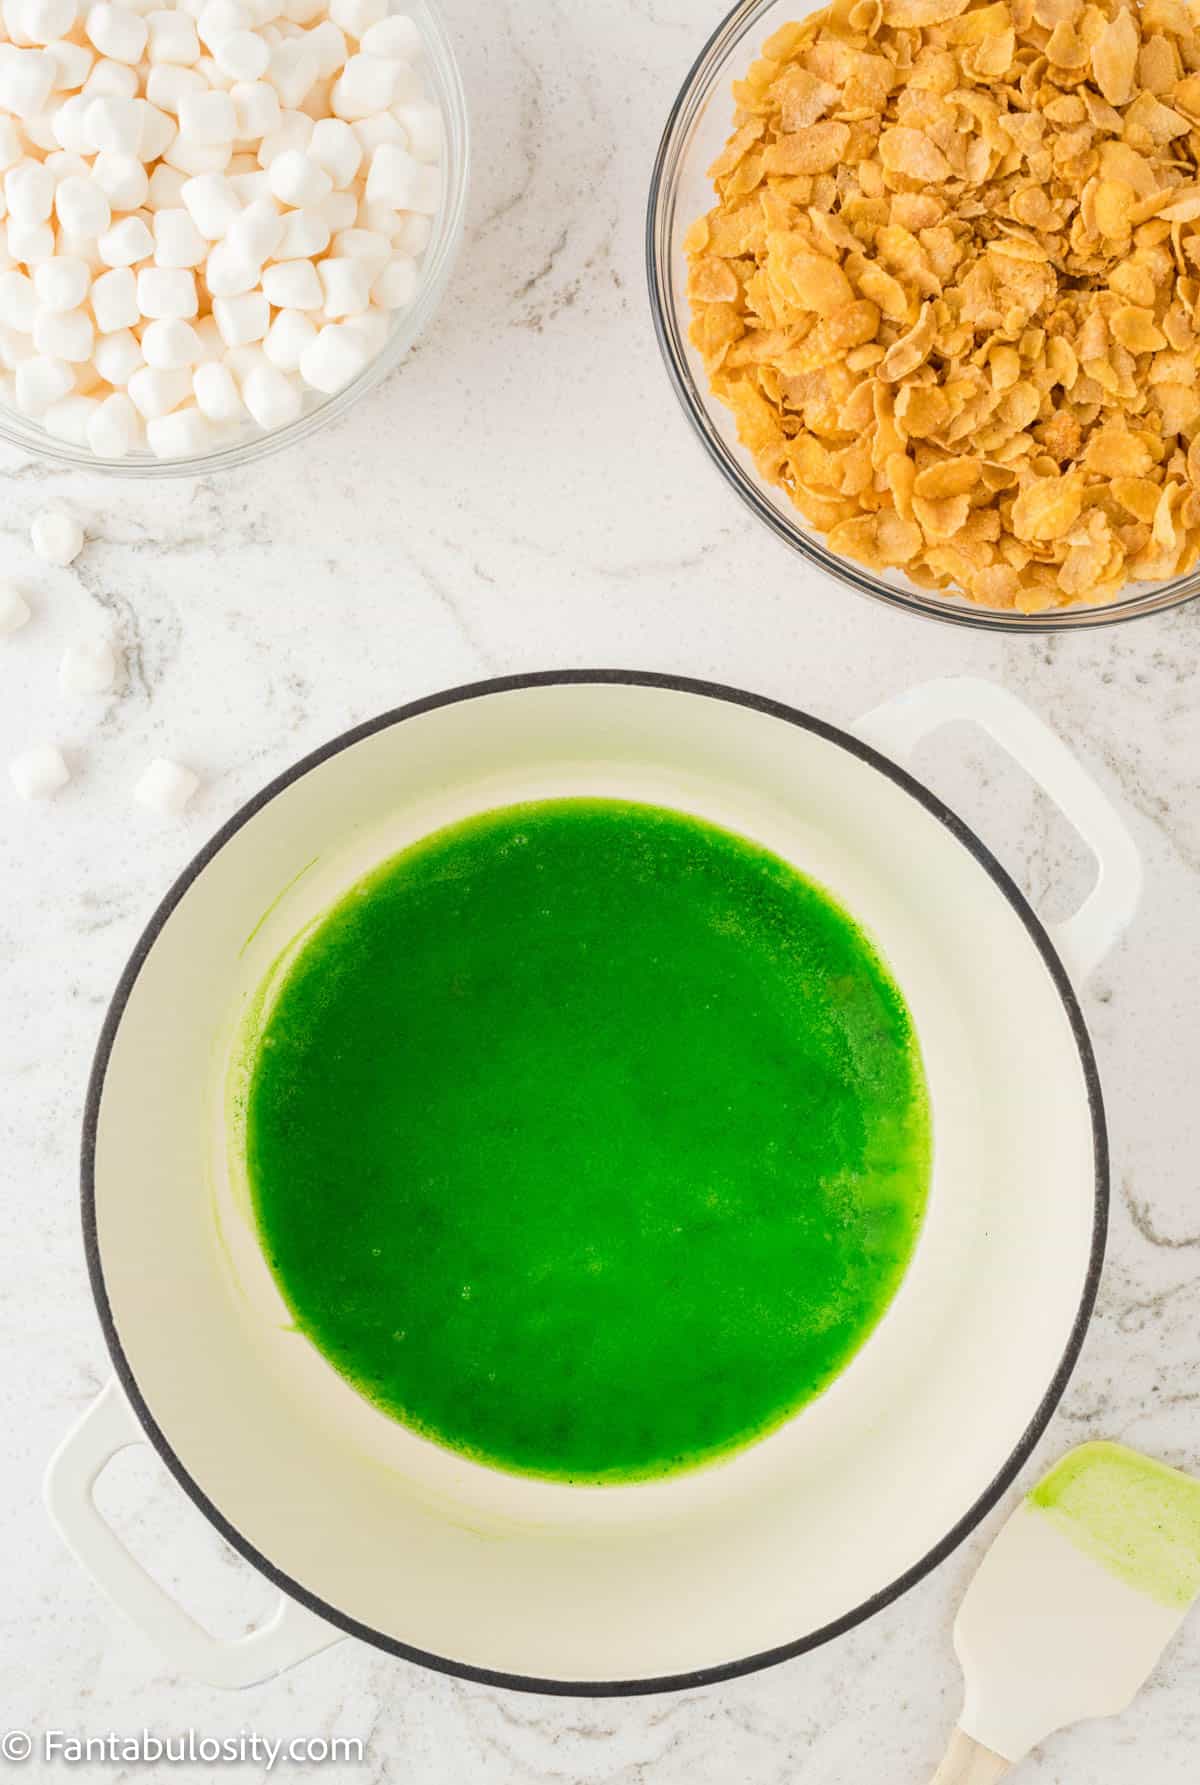 Green food coloring has been added to melted butter in a large pot in preparation to make cornflake wreath cookies